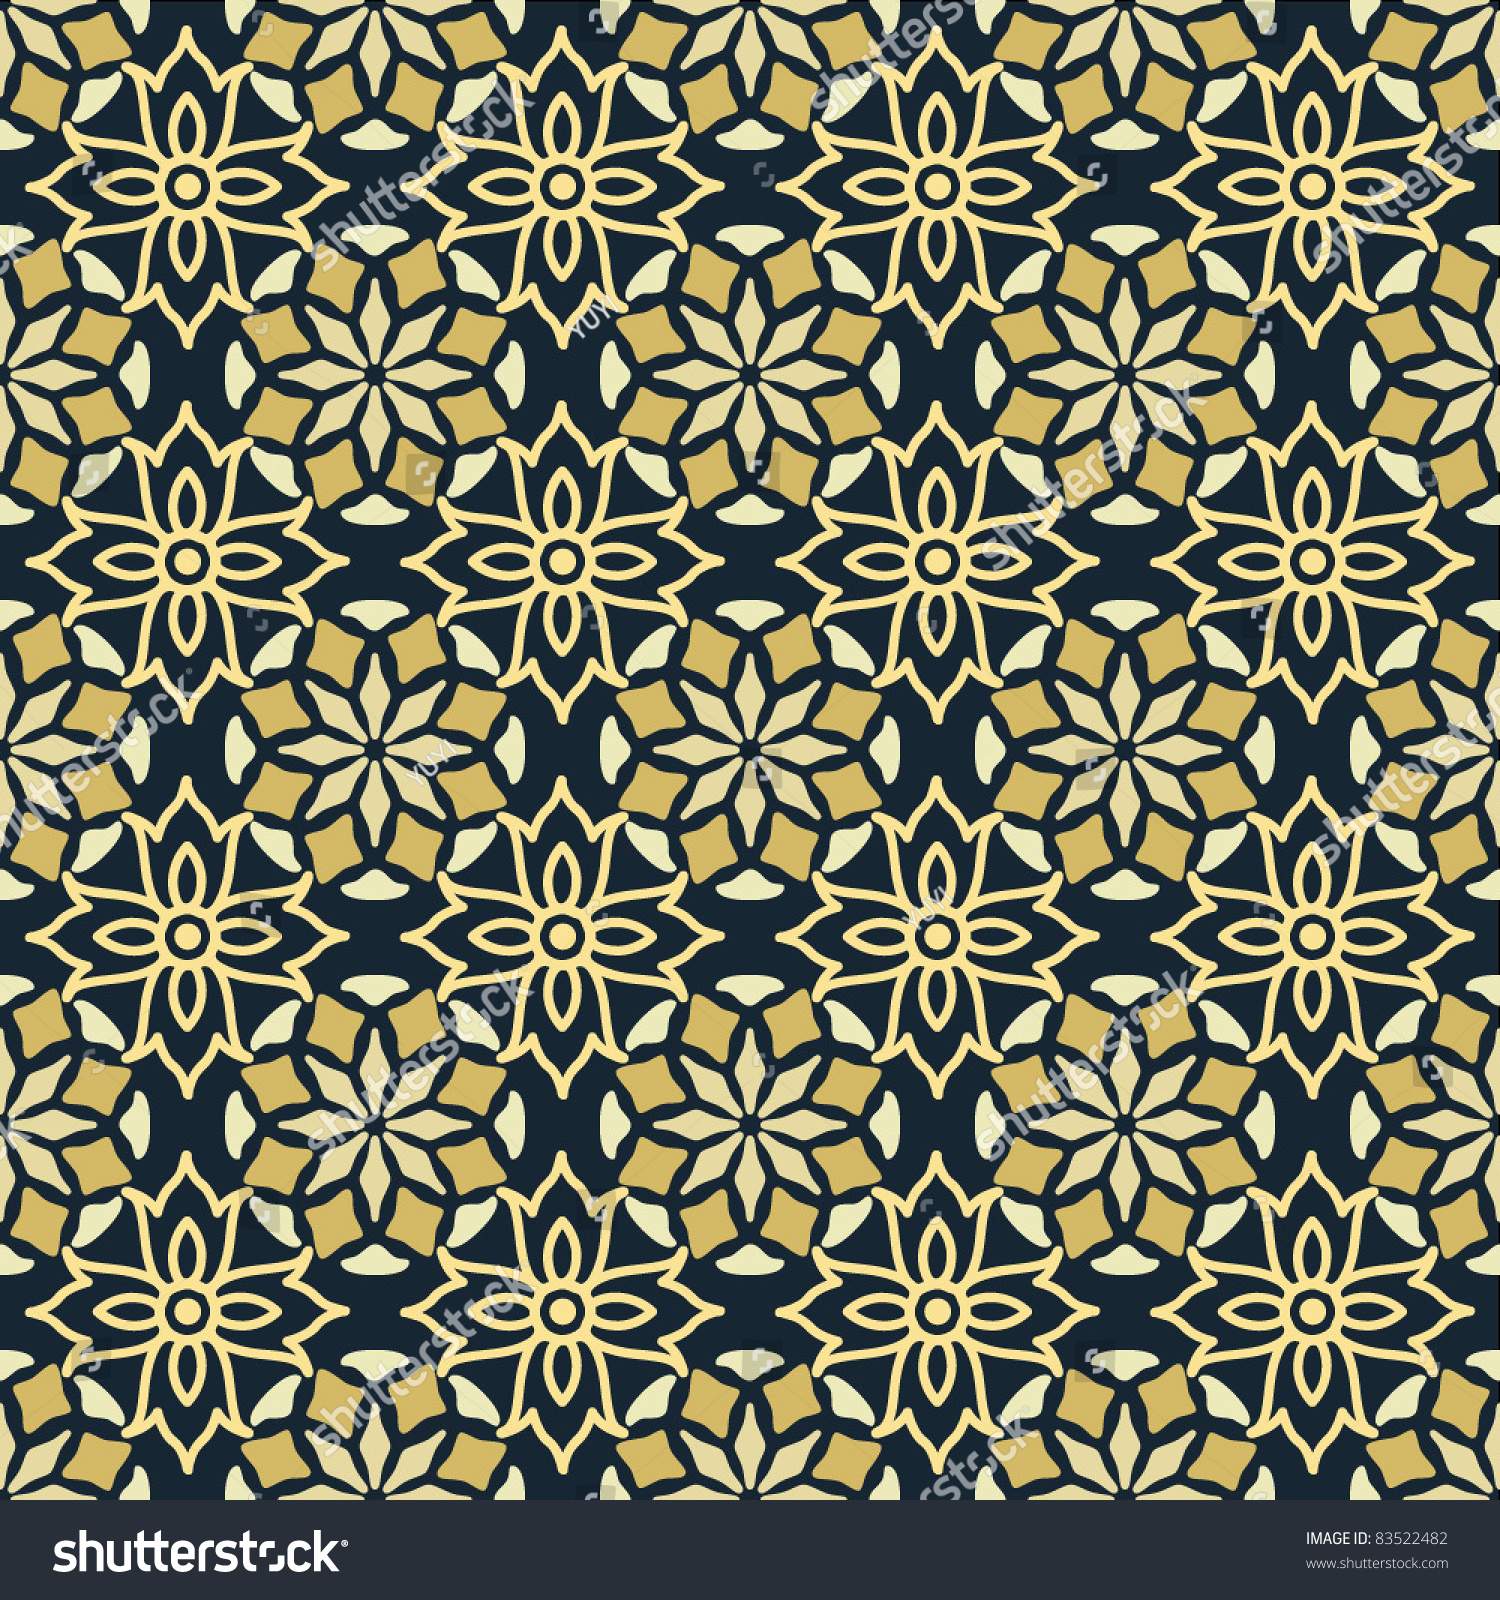 Traditional Japanese Seamless Patterns With Geometric And Nature Themes ...